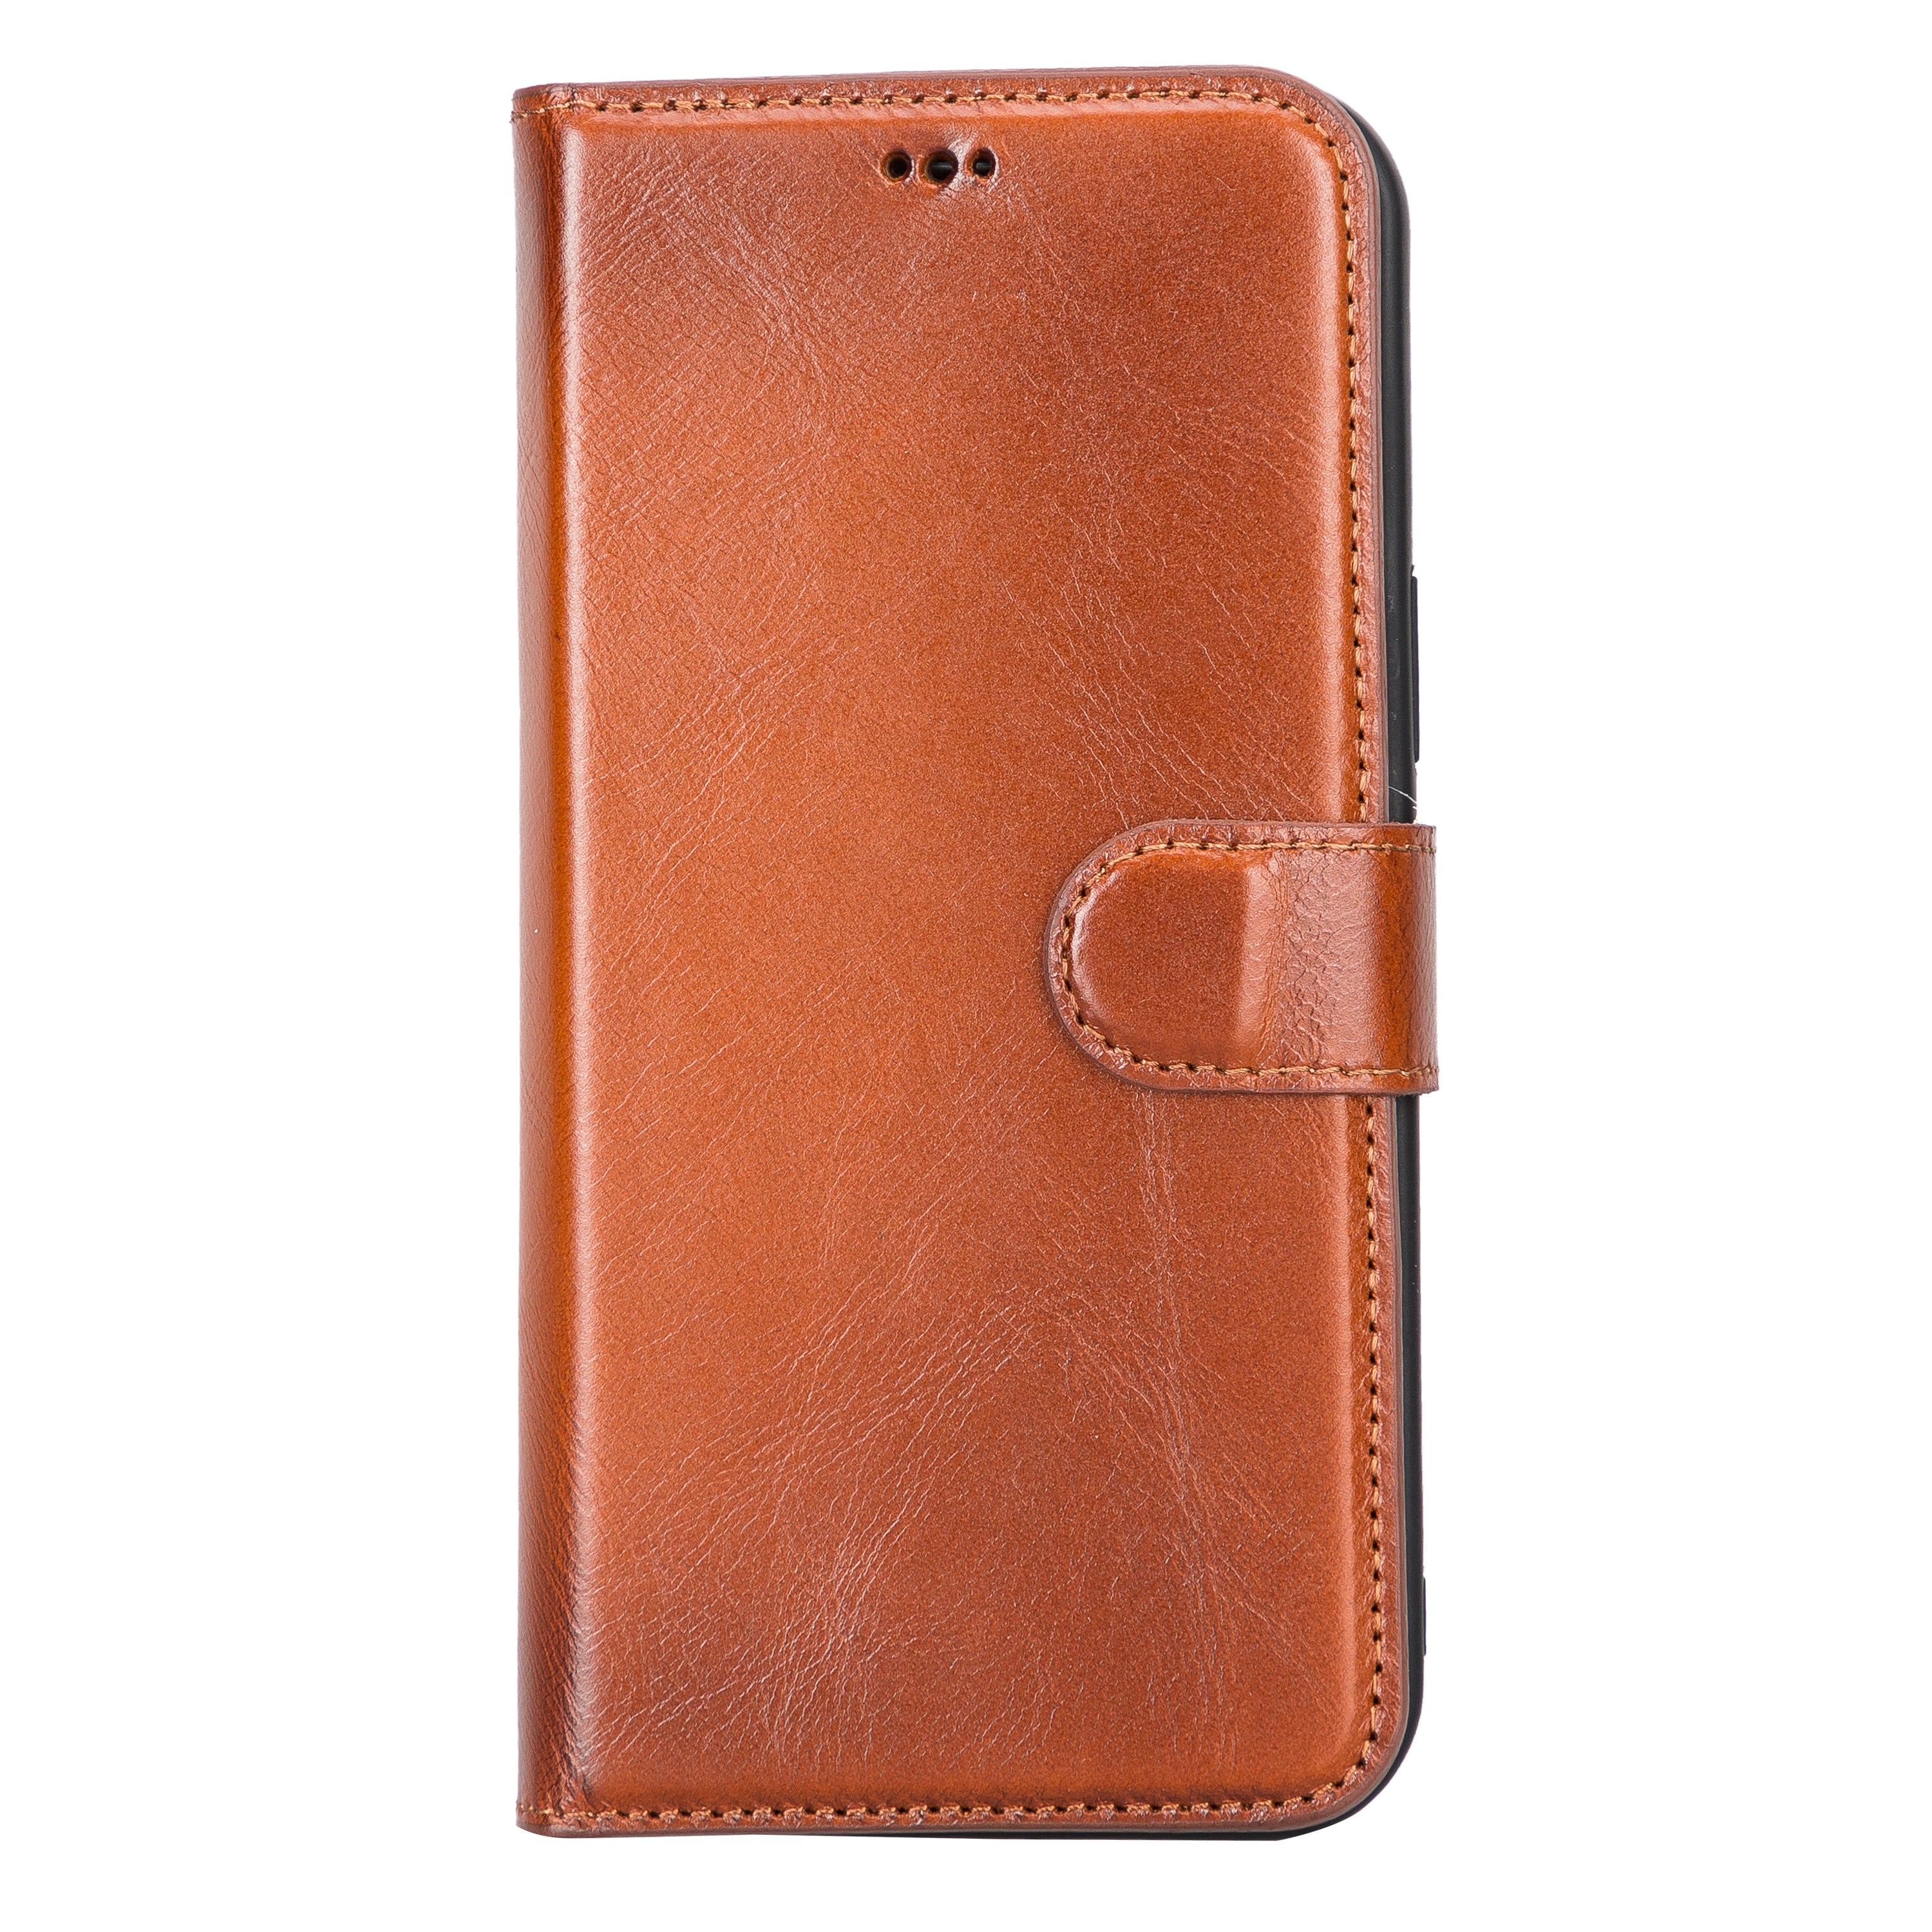 DelfiCase Leather Magnetic Detachable Wallet Case for iPhone 12 Pro Max (6.7") 29